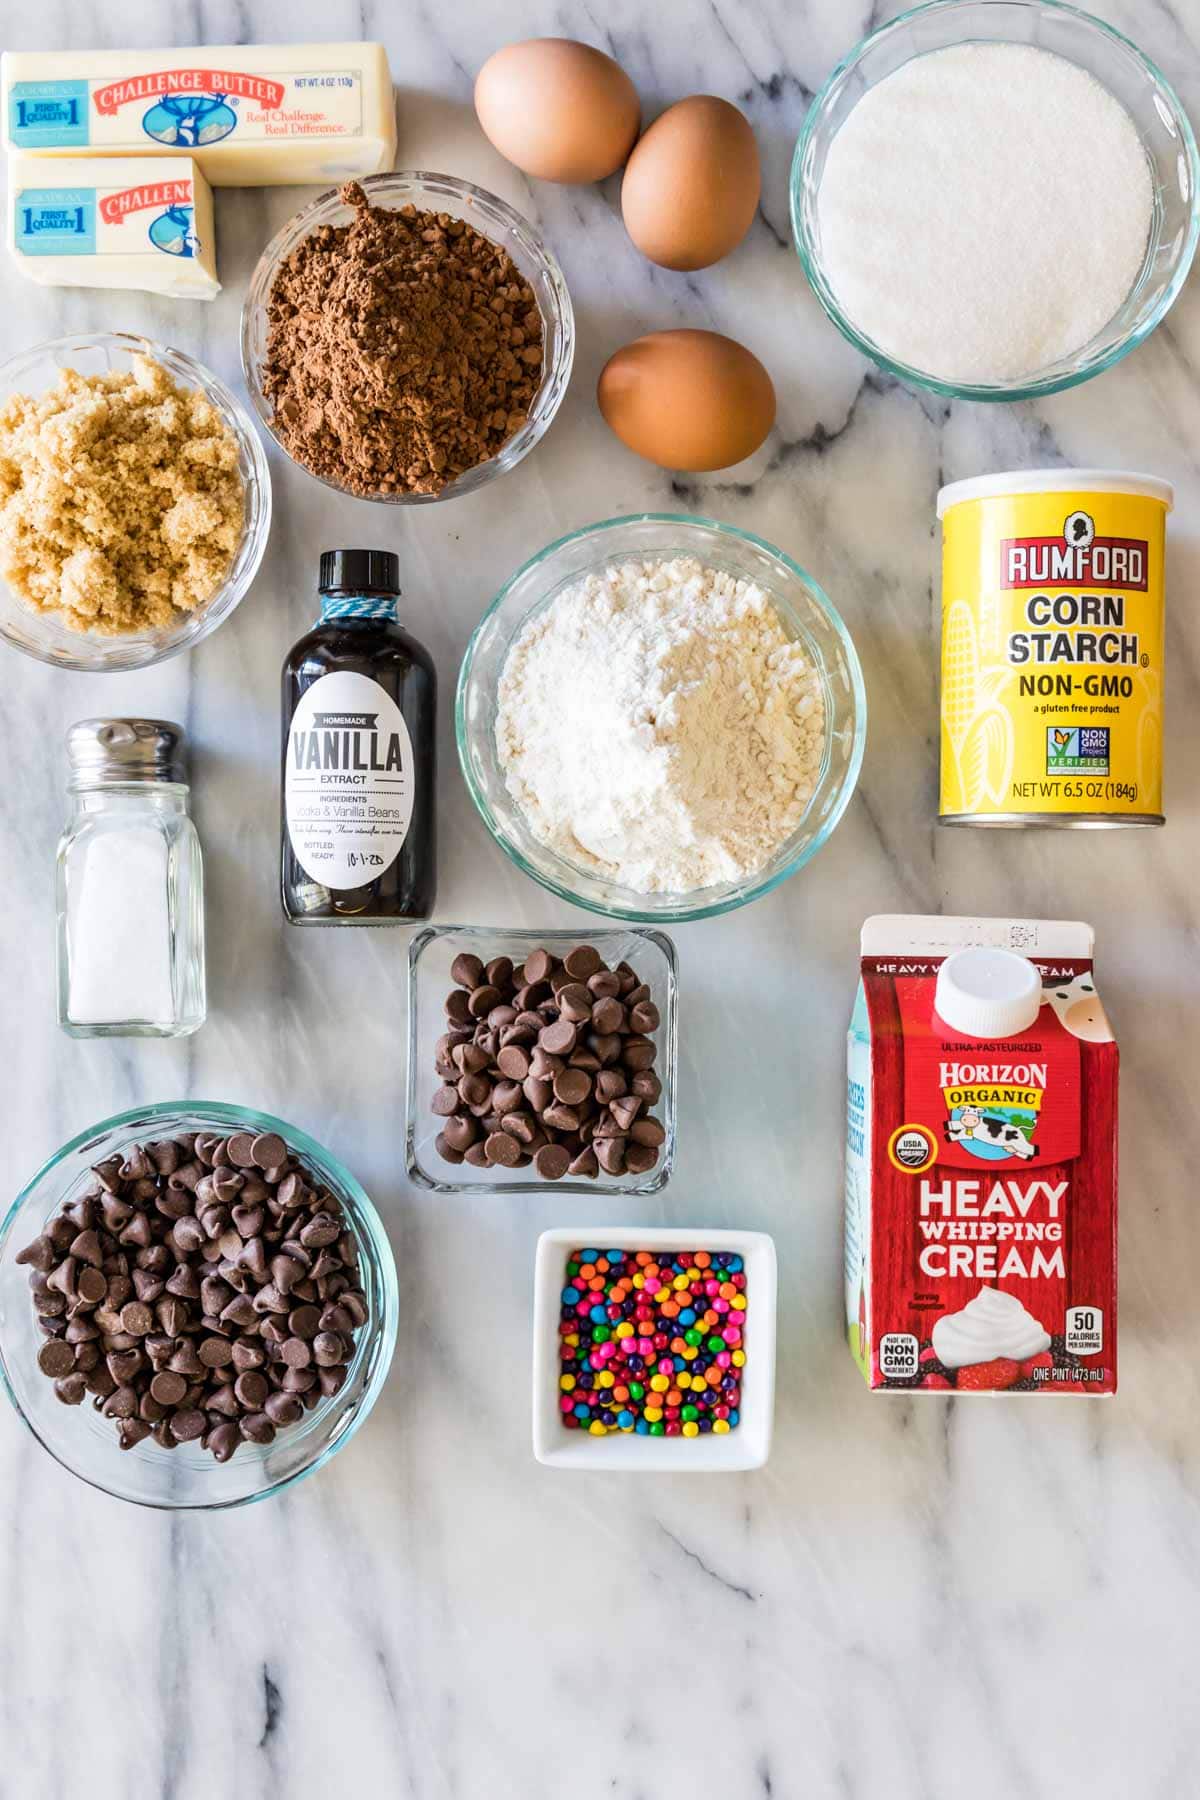 Overhead view of ingredients including chocolate chips, colorful candies, cocoa powder, heavy cream, and more.